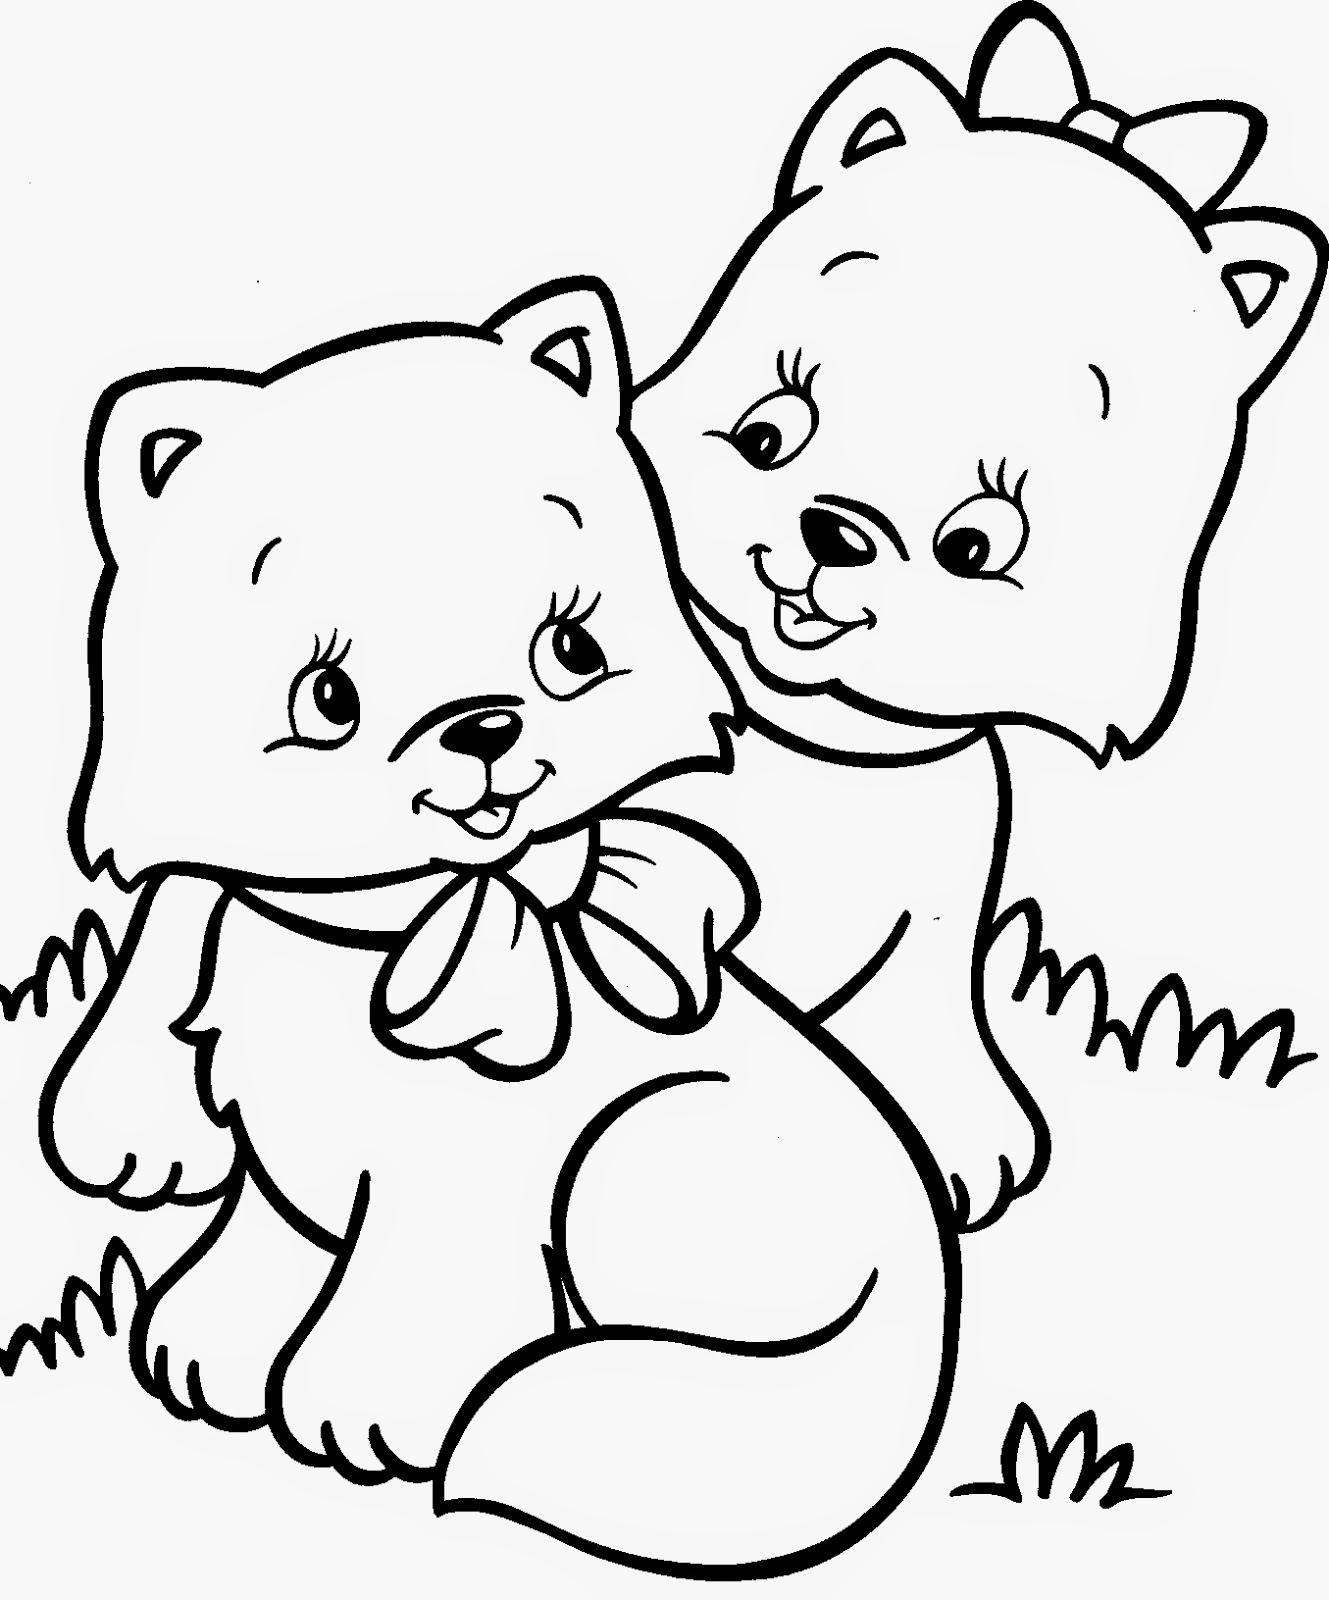 Kitten Coloring Page 3